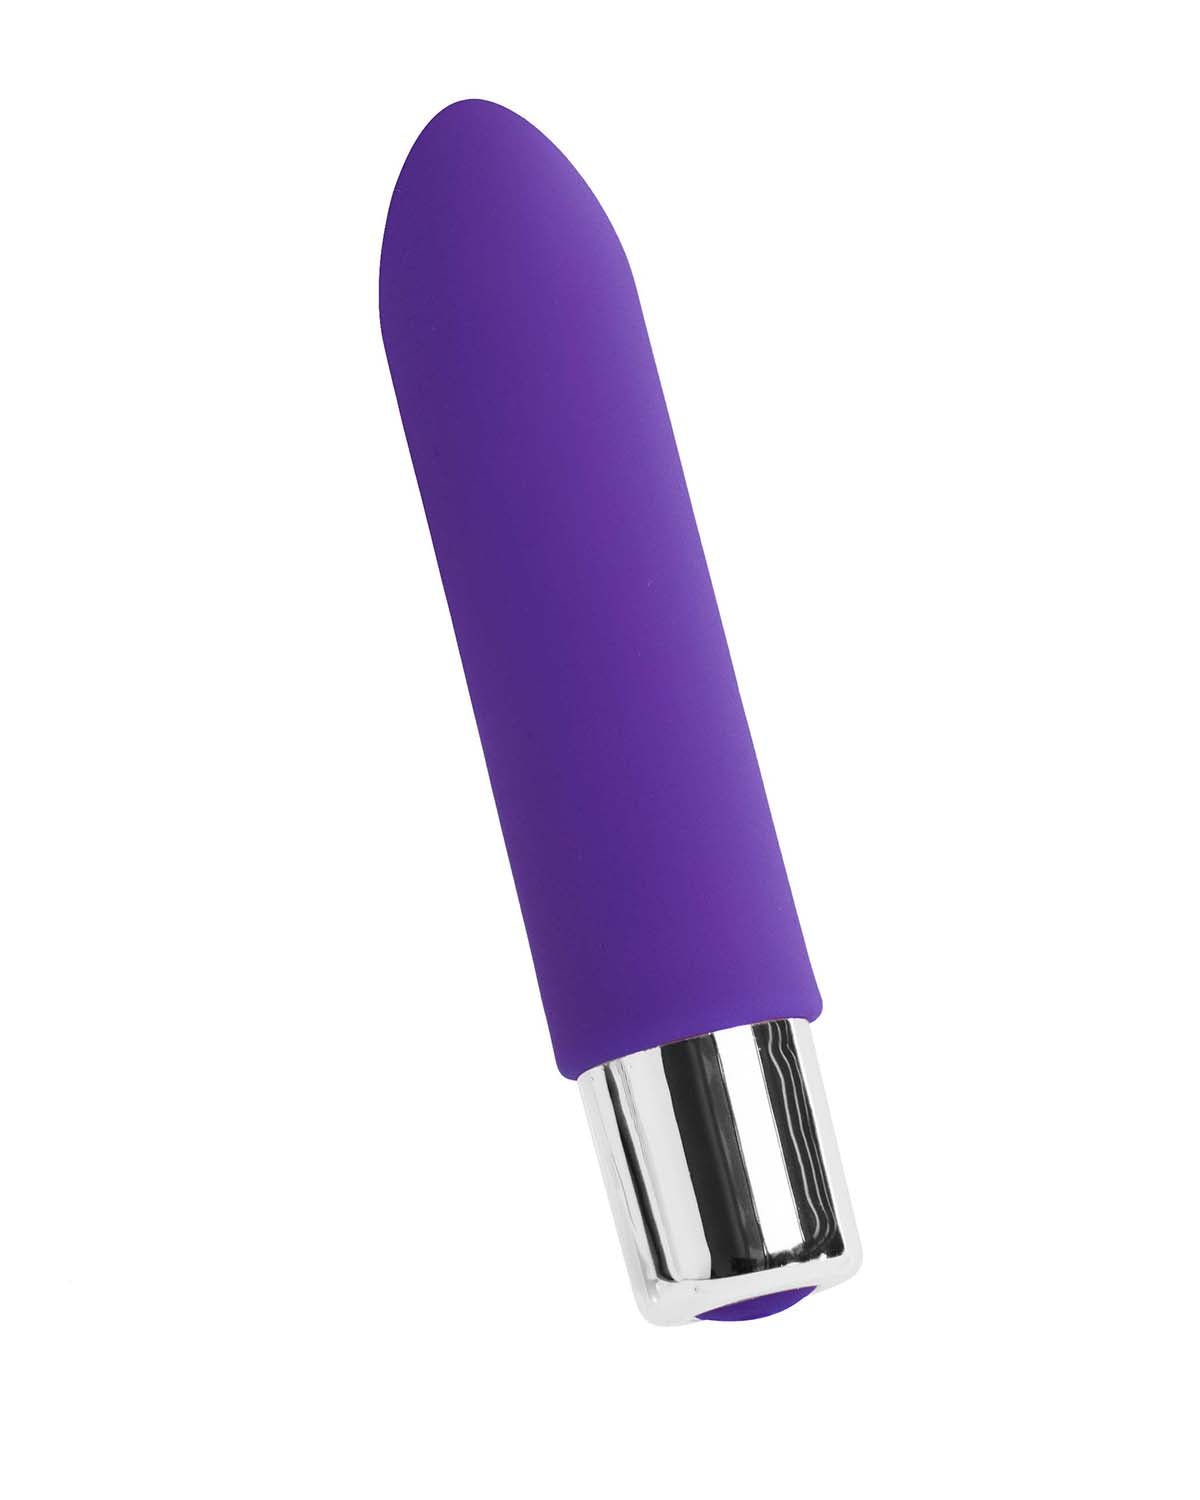 BAM Mini Sleek,Powerful and Whispers of Pleasure in 10 Modes